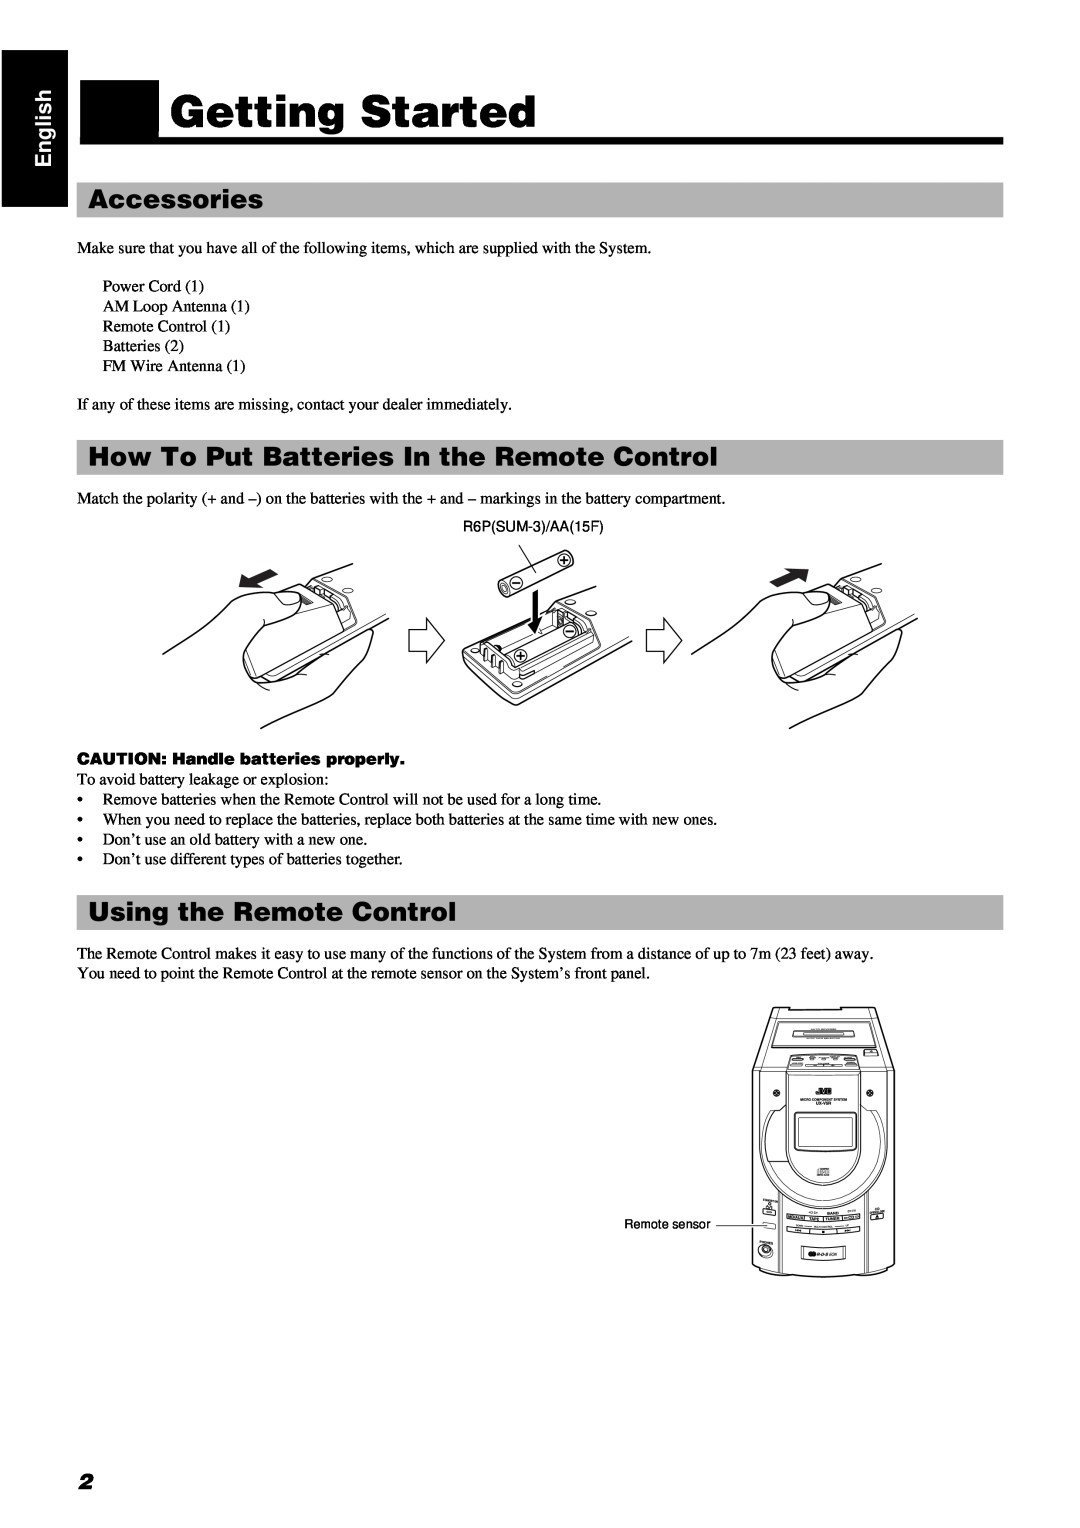 JVC LVT0211-001A manual Getting Started, Accessories, How To Put Batteries In the Remote Control, Using the Remote Control 